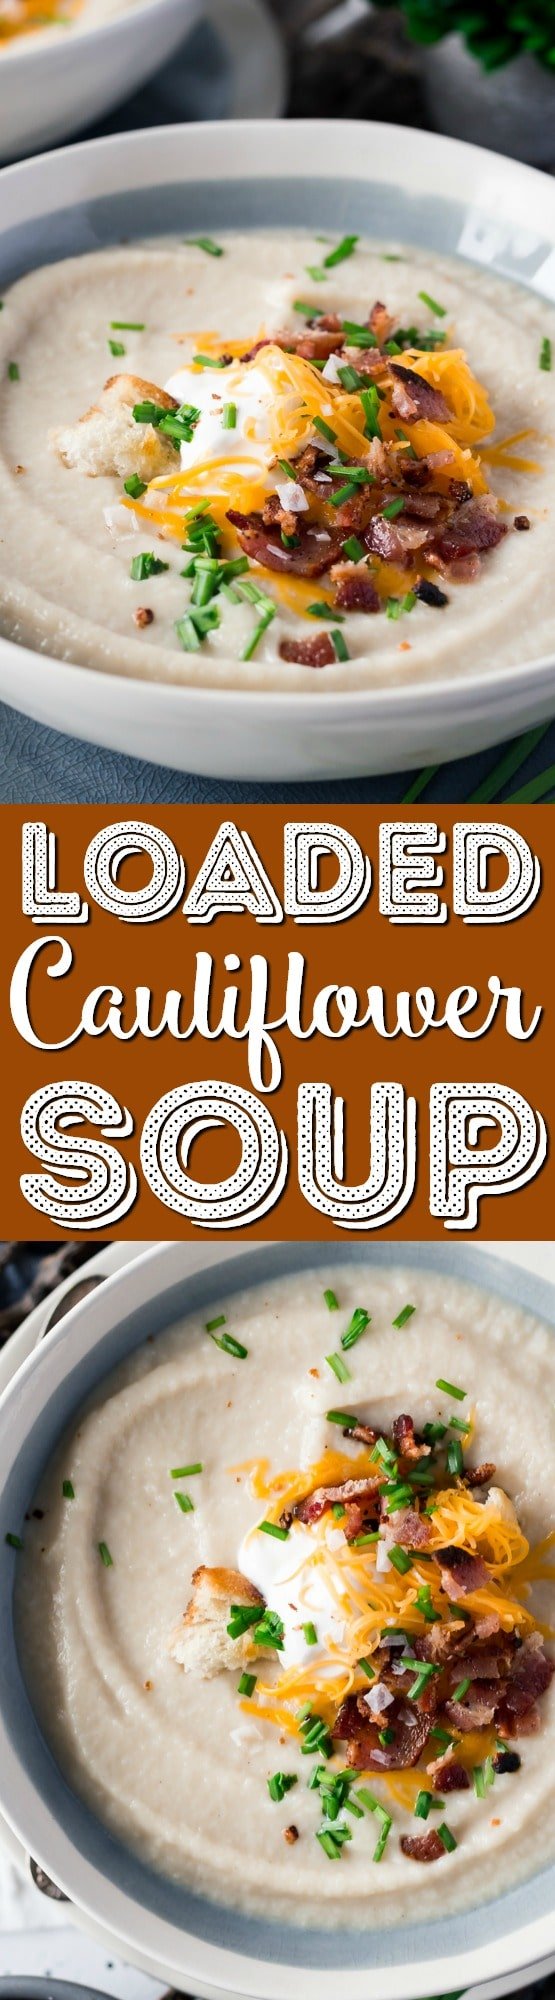 This Loaded Cauliflower Soup is creamy and delicious! It's made with fresh cauliflower, sweet onion, and topped with crispy bacon, cheddar cheese, and sour cream for a healthy meal option. via @sugarandsoulco